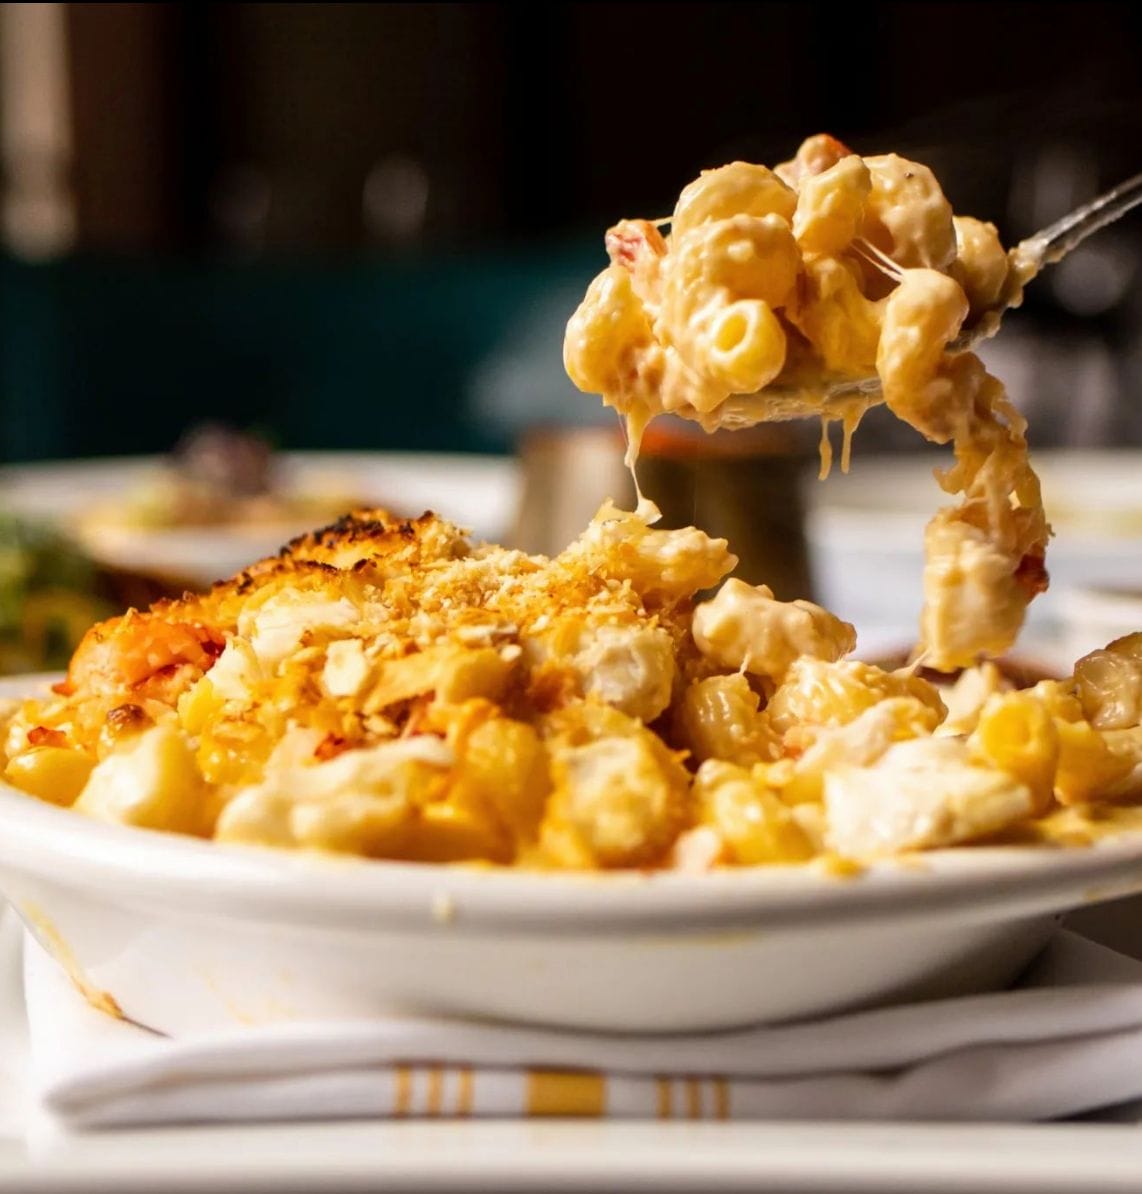 Seafood Mac & Cheese from DePaul's Table